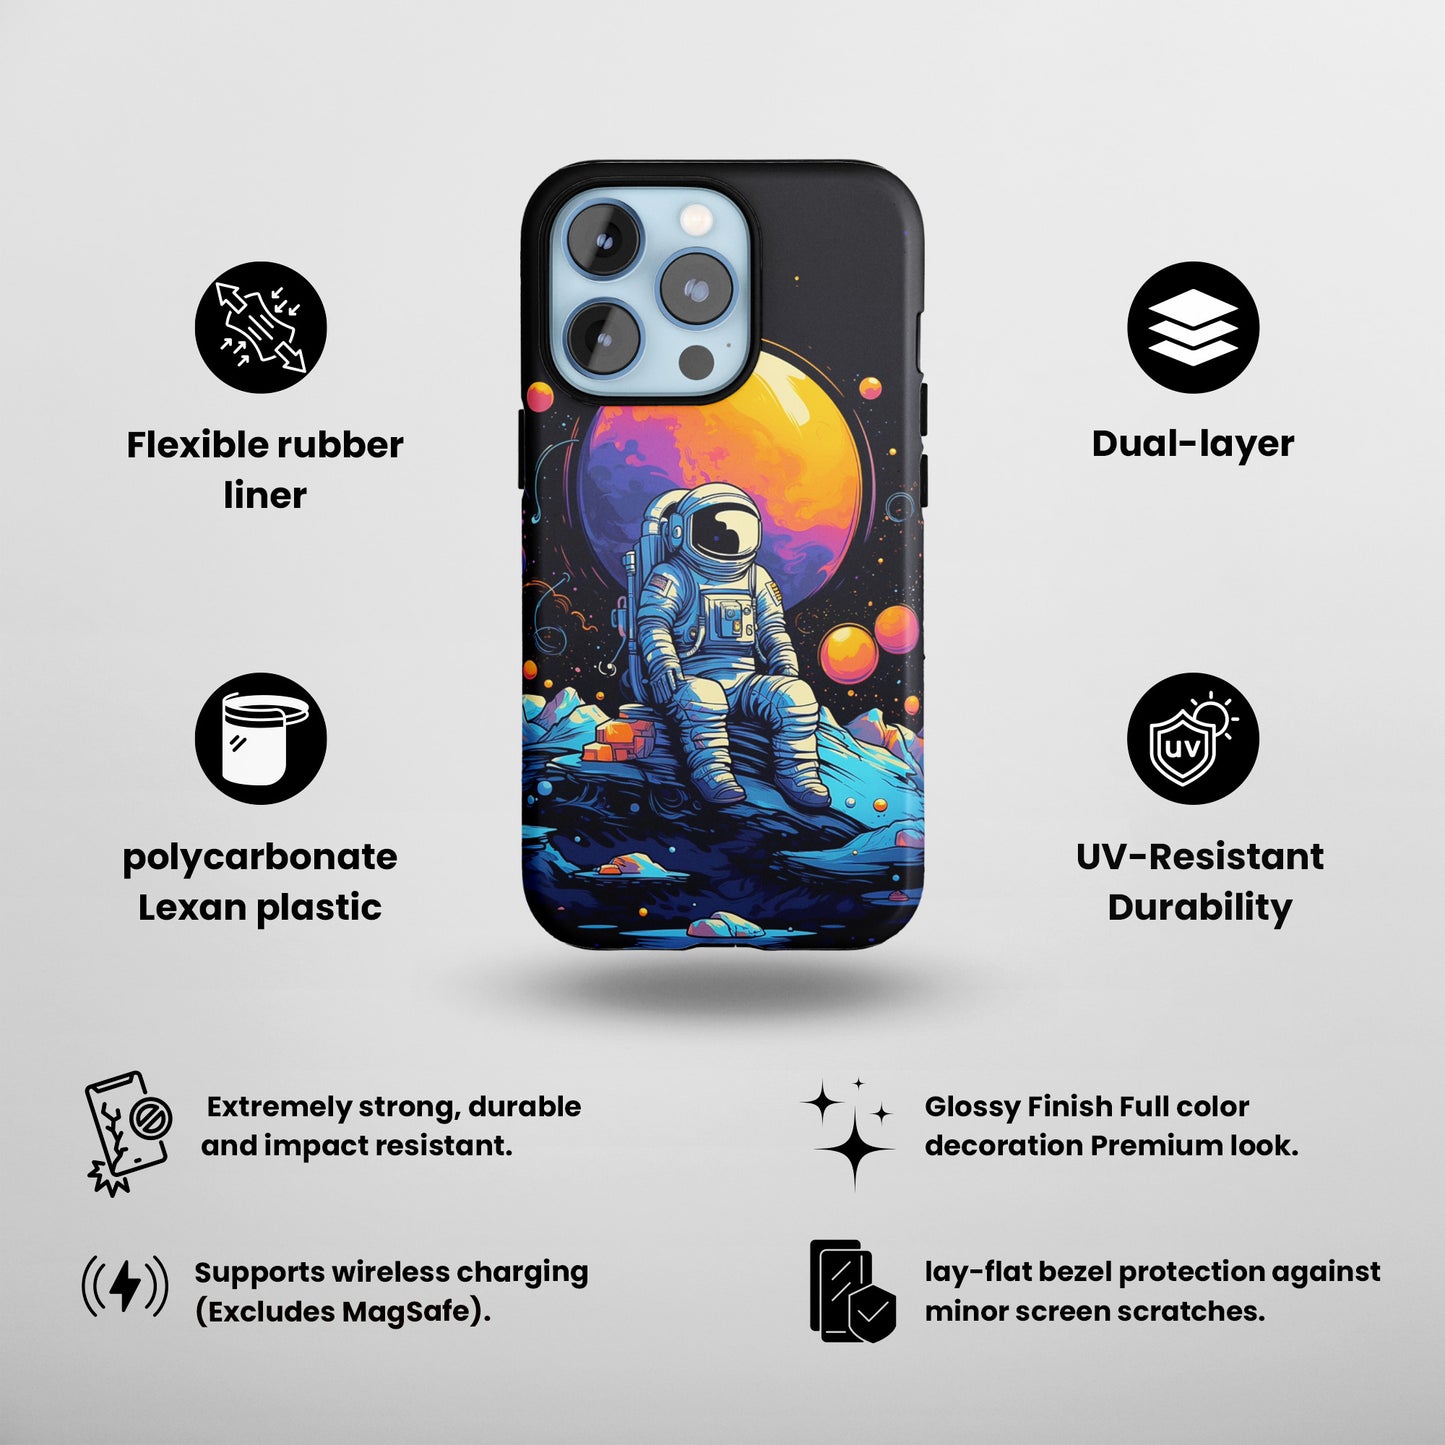 Galactic Solitude (iPhone Case 11-15)Safeguard Your iPhone in Style with RIMA Tough Cases. Designed for iPhone 11-15, these cases offer the ultimate blend of sophistication and resilience. Eco-consciousRimaGallery